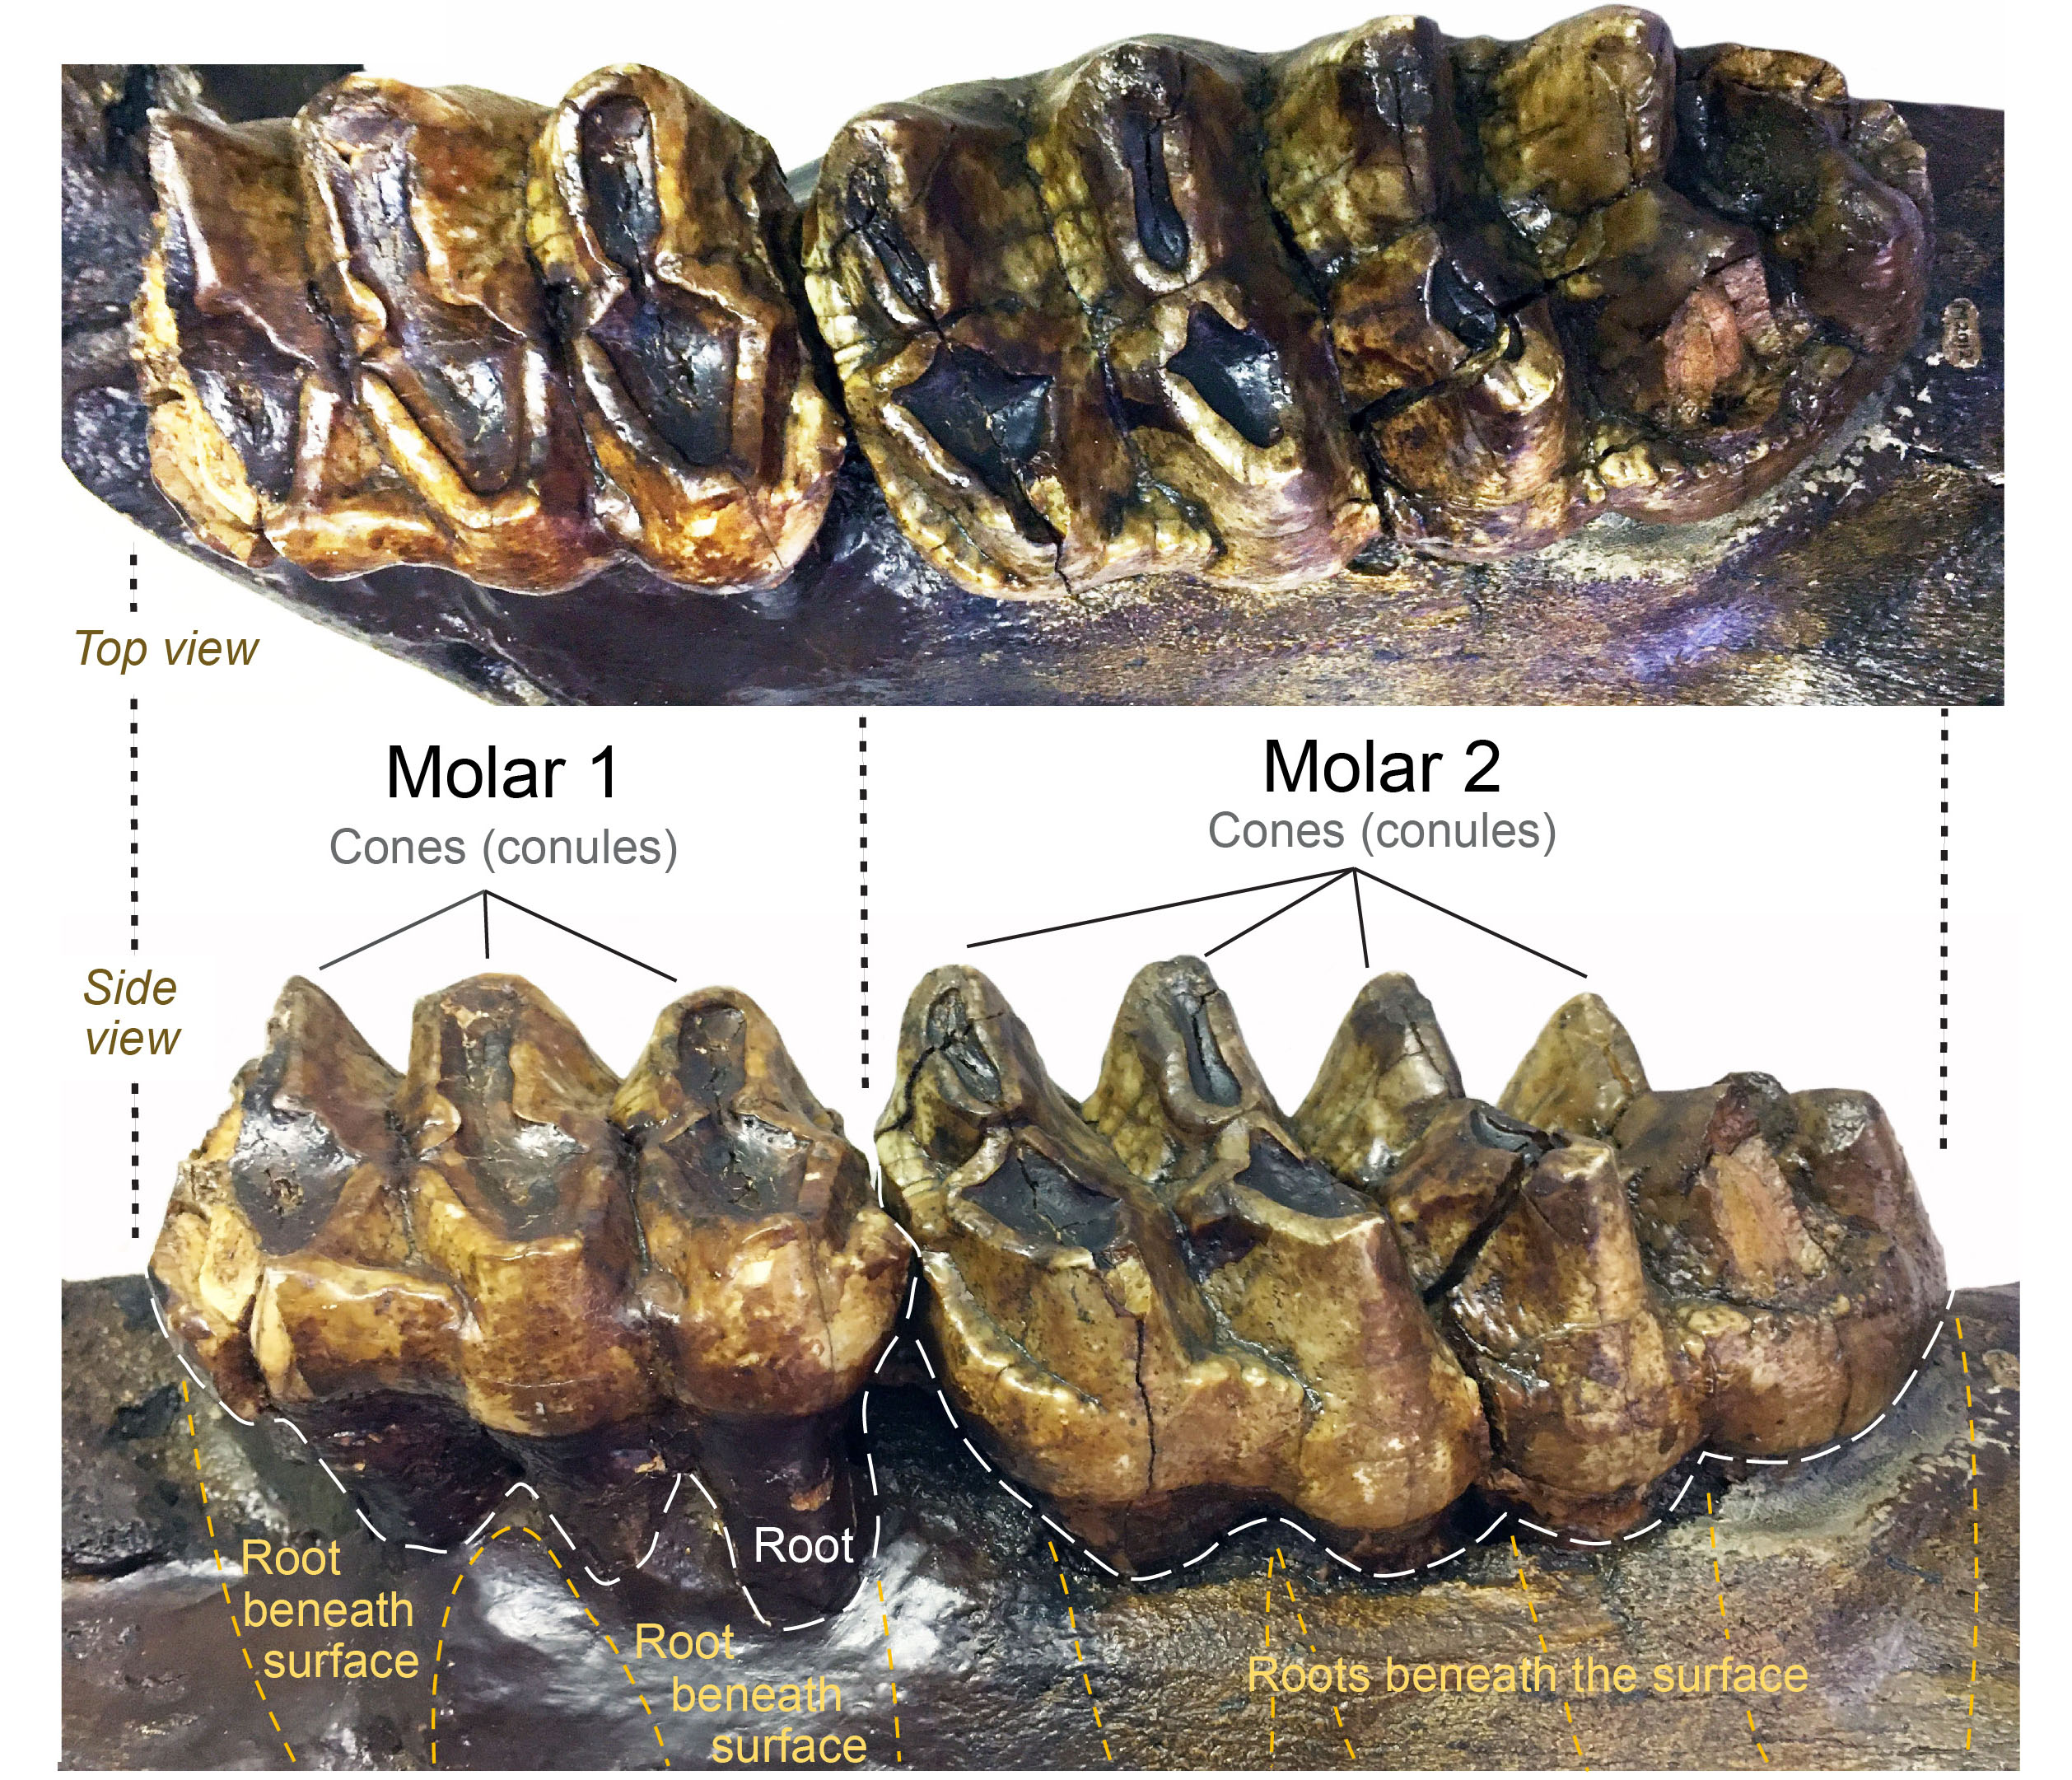 Side and top views of mastodon molars from this month’s fossil.